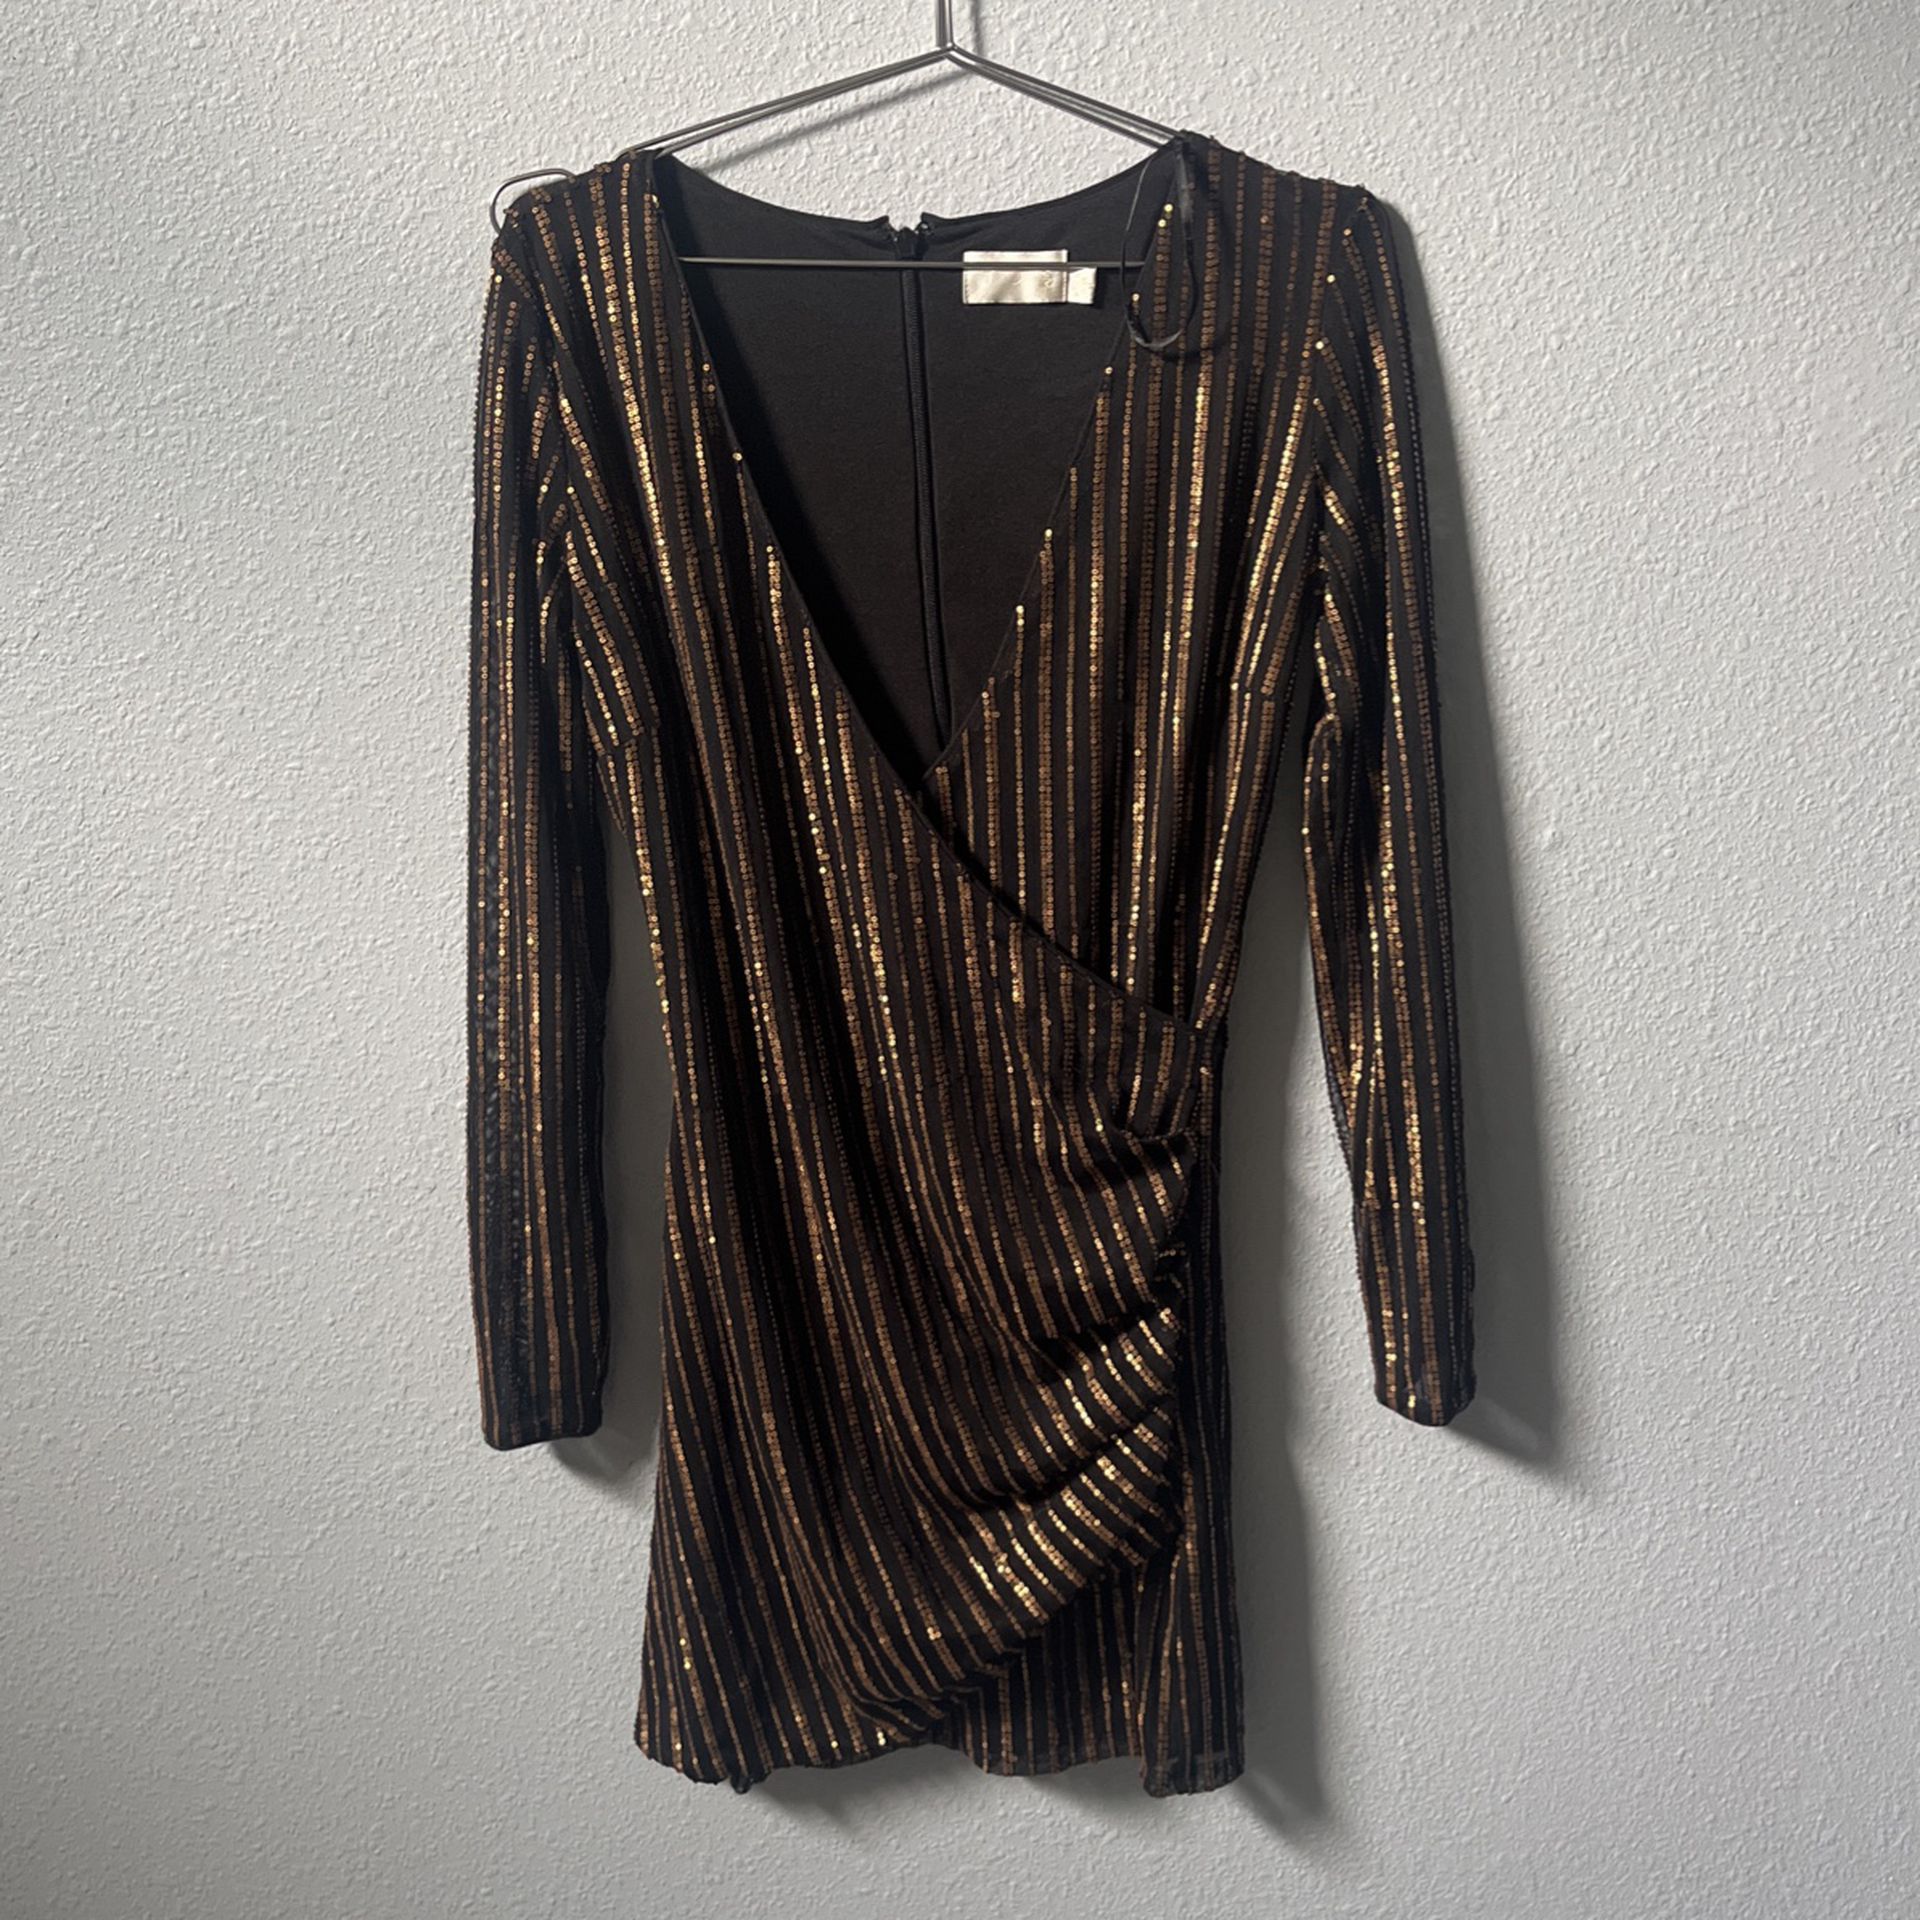 Black And Gold Dress Size M 